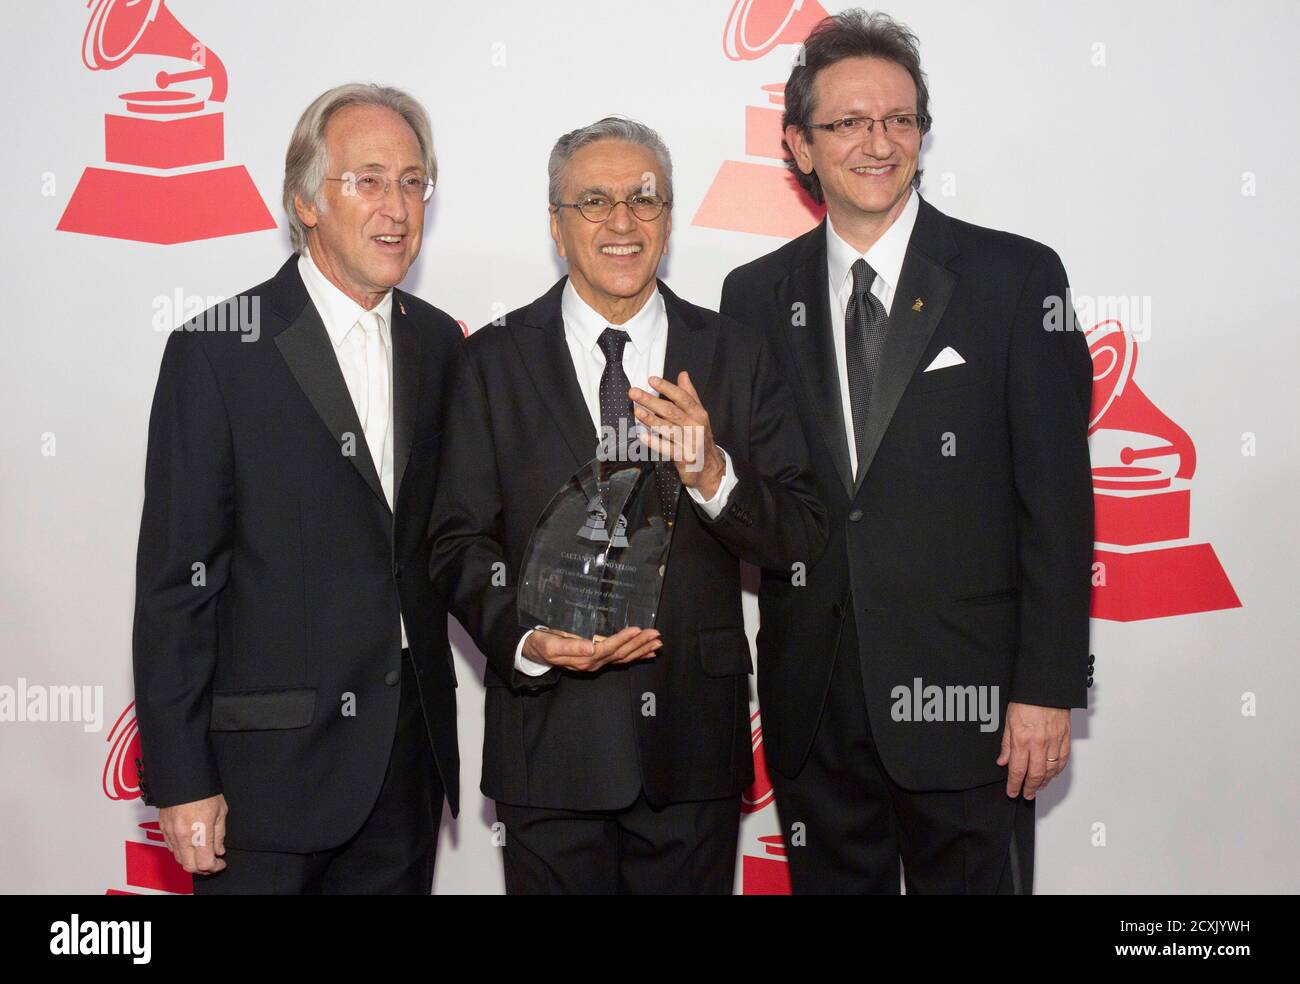 Neil Portnow (L), president of the National Academy of Recording Arts and Sciences, honoree Caetano Veloso (C) and Gabriel Abaroa Jr., president and CEO of the Latin Academy of Recording Arts and Sciences, arrive for the 2012 Latin Recording Academy Person of the Year tribute dinner and concert at the MGM Grand Garden Arena in Las Vegas, Nevada November 14 , 2012. REUTERS/Steve Marcus (UNITED STATES - Tags: ENTERTAINMENT) Stock Photo